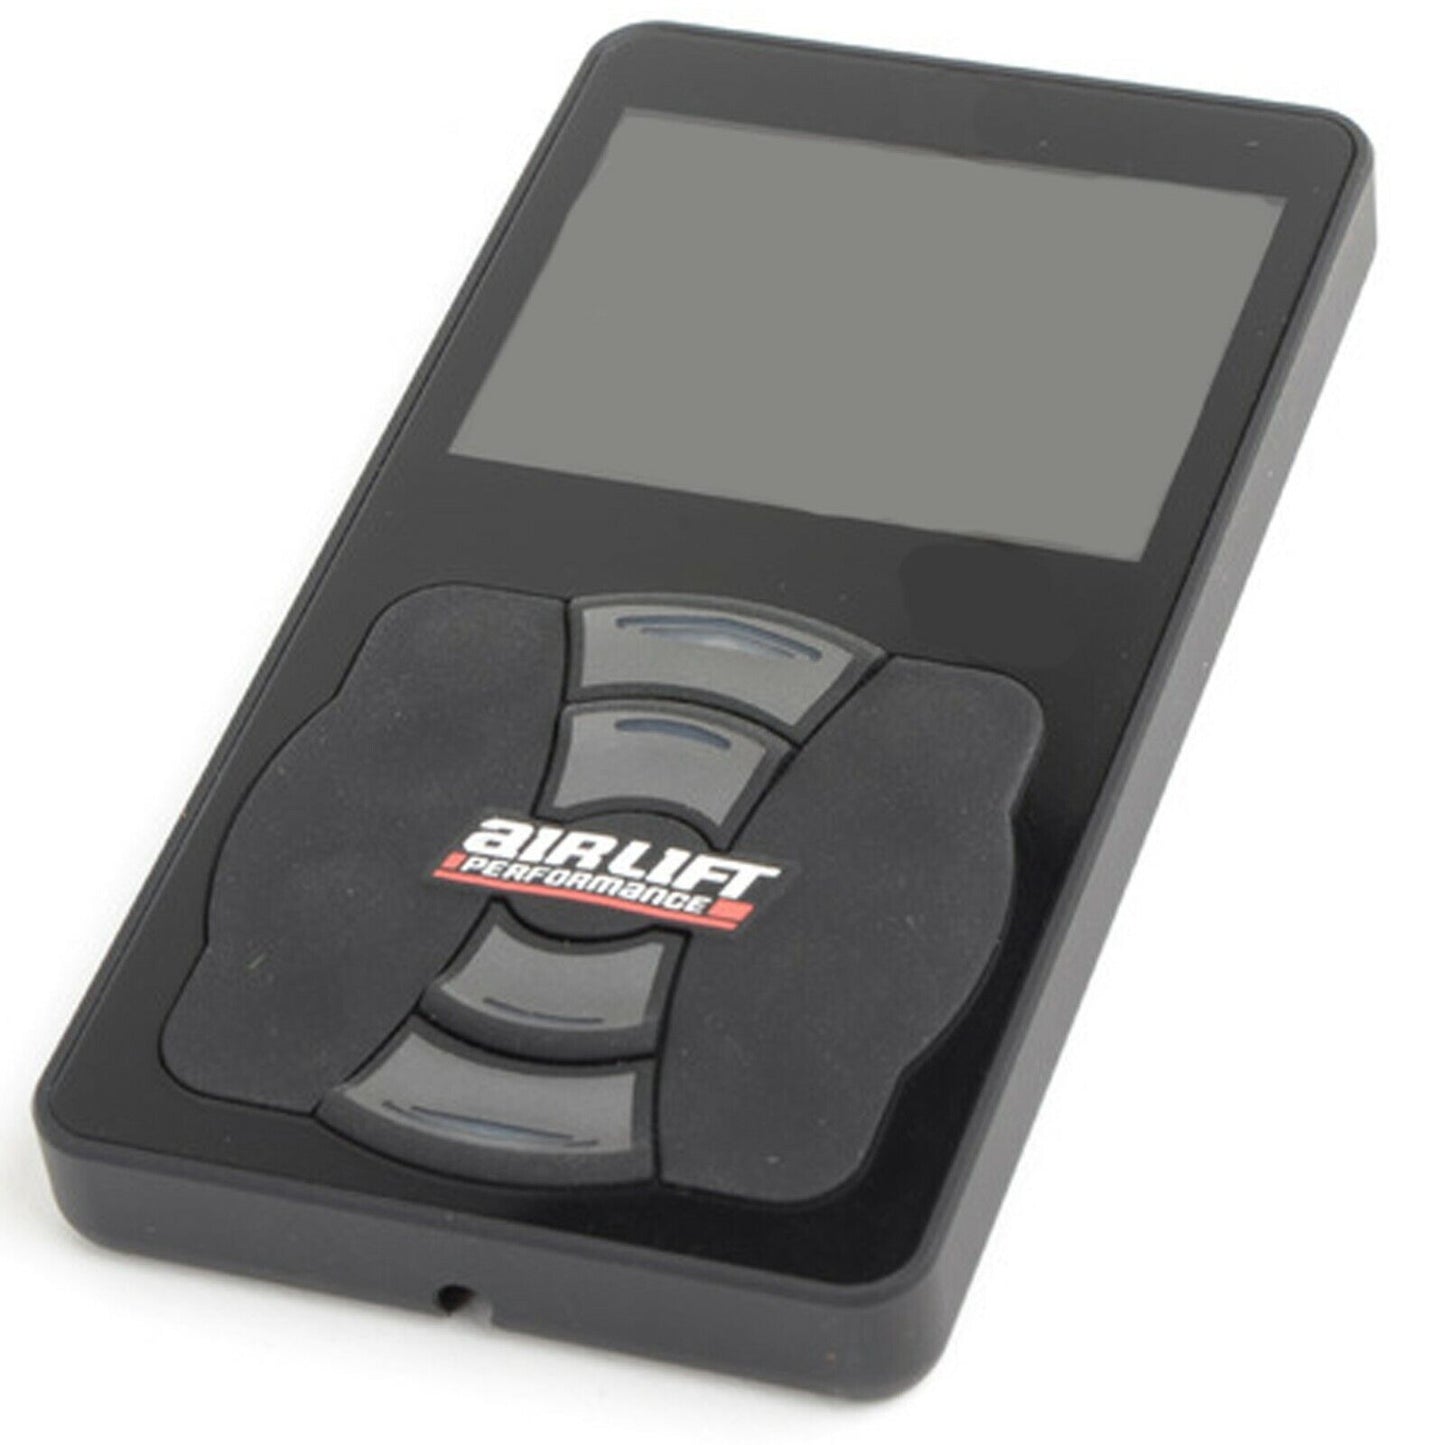 airlift performance handheld controller